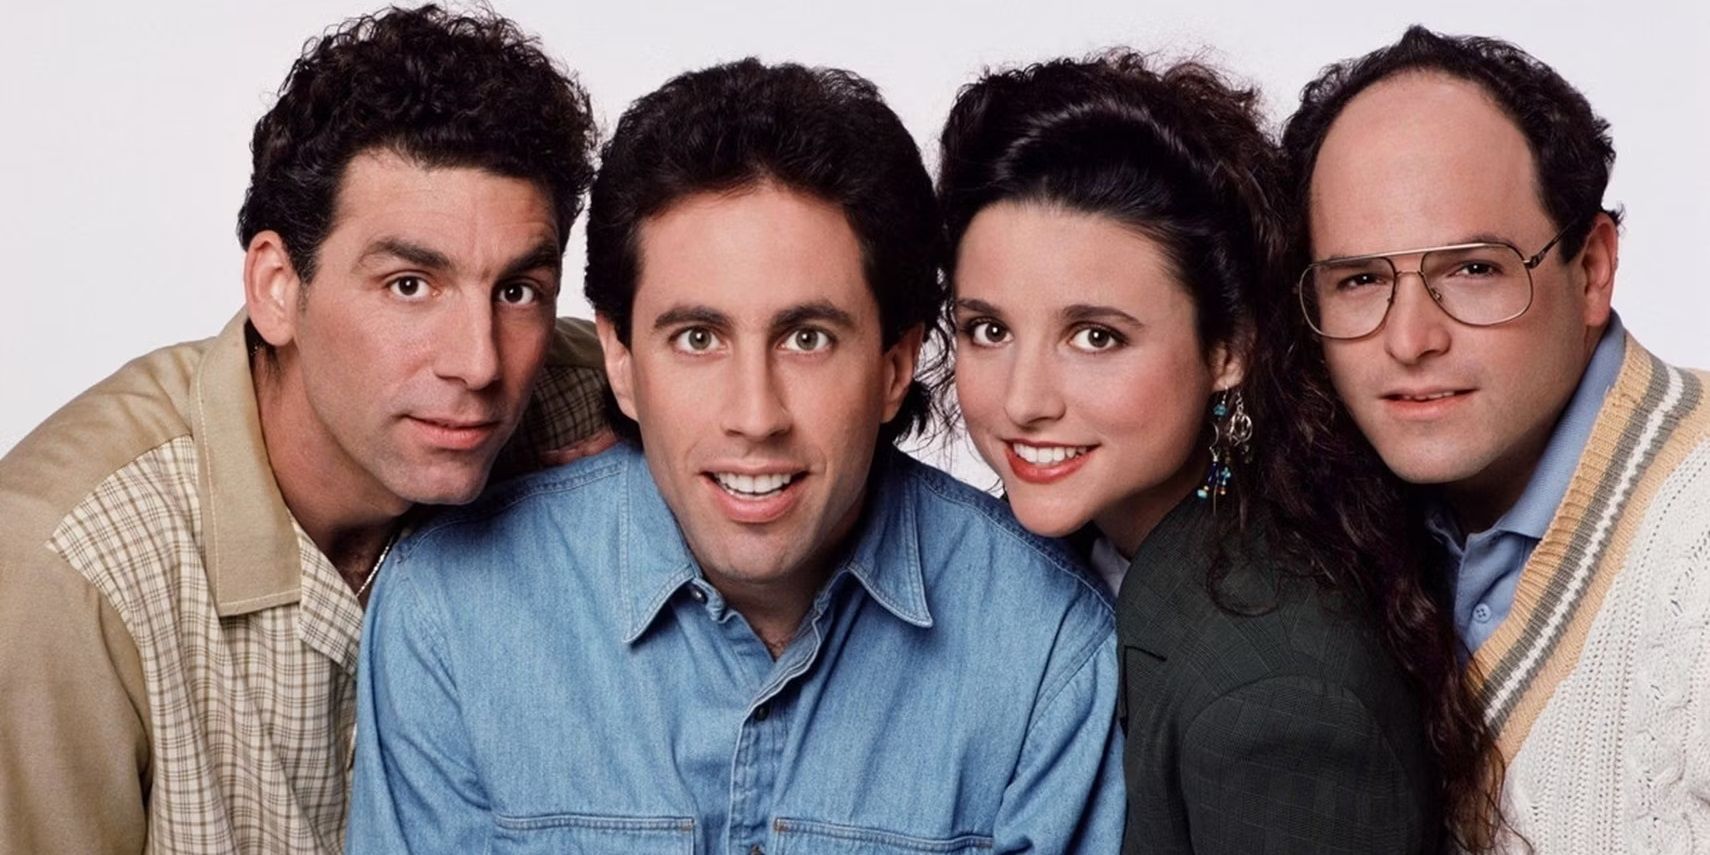 The_Seinfeld_cast_in_a_promotional_image_for_season_1